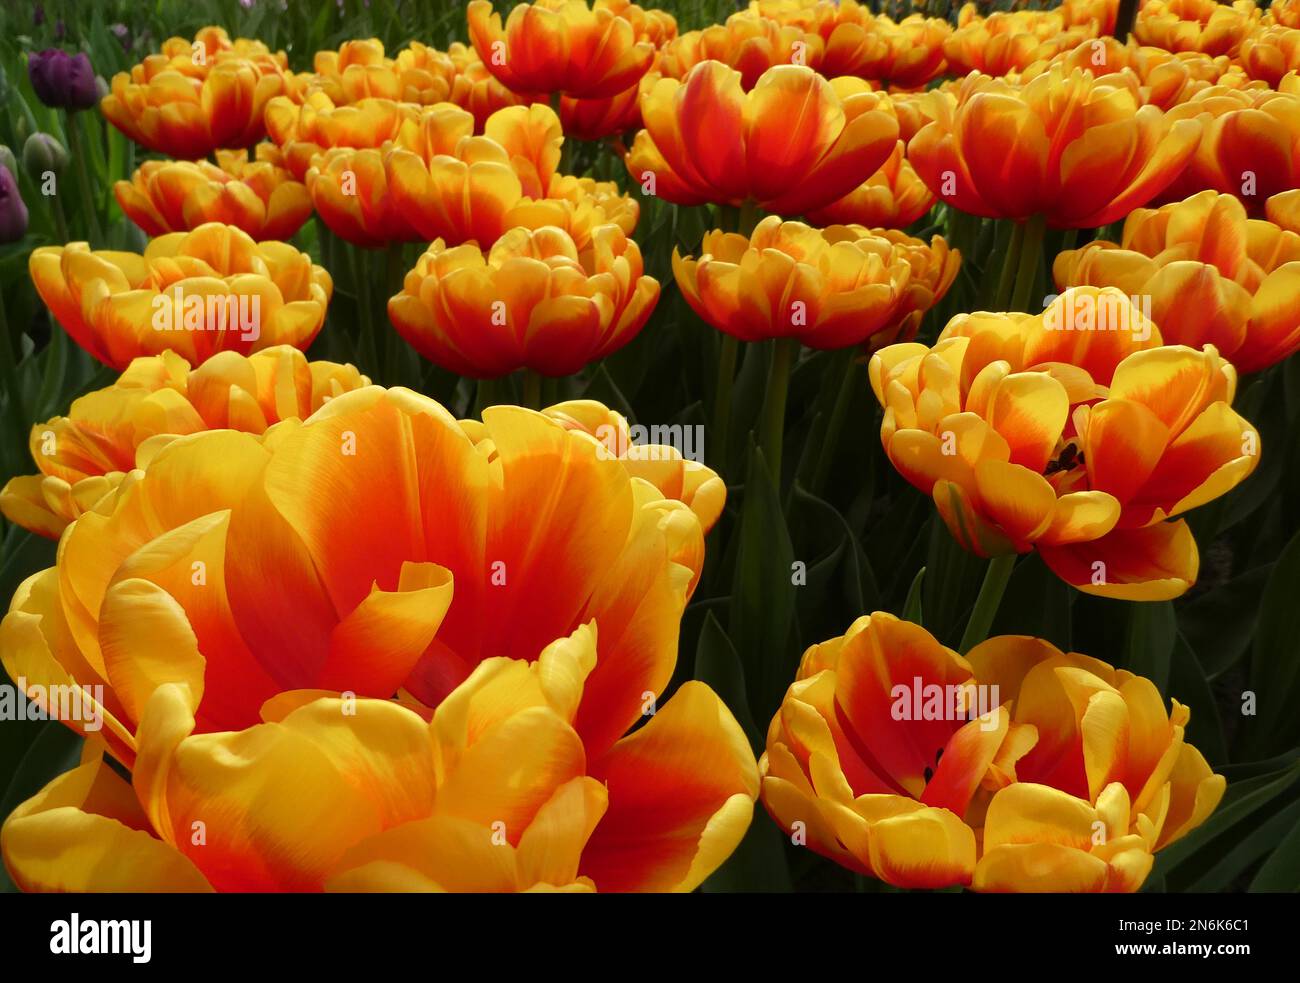 Fabulous yellow and red cultivated tulip named Confucius. Its a Darwin Hybrid tulip. Location: Keukenhof, Netherlands Stock Photo